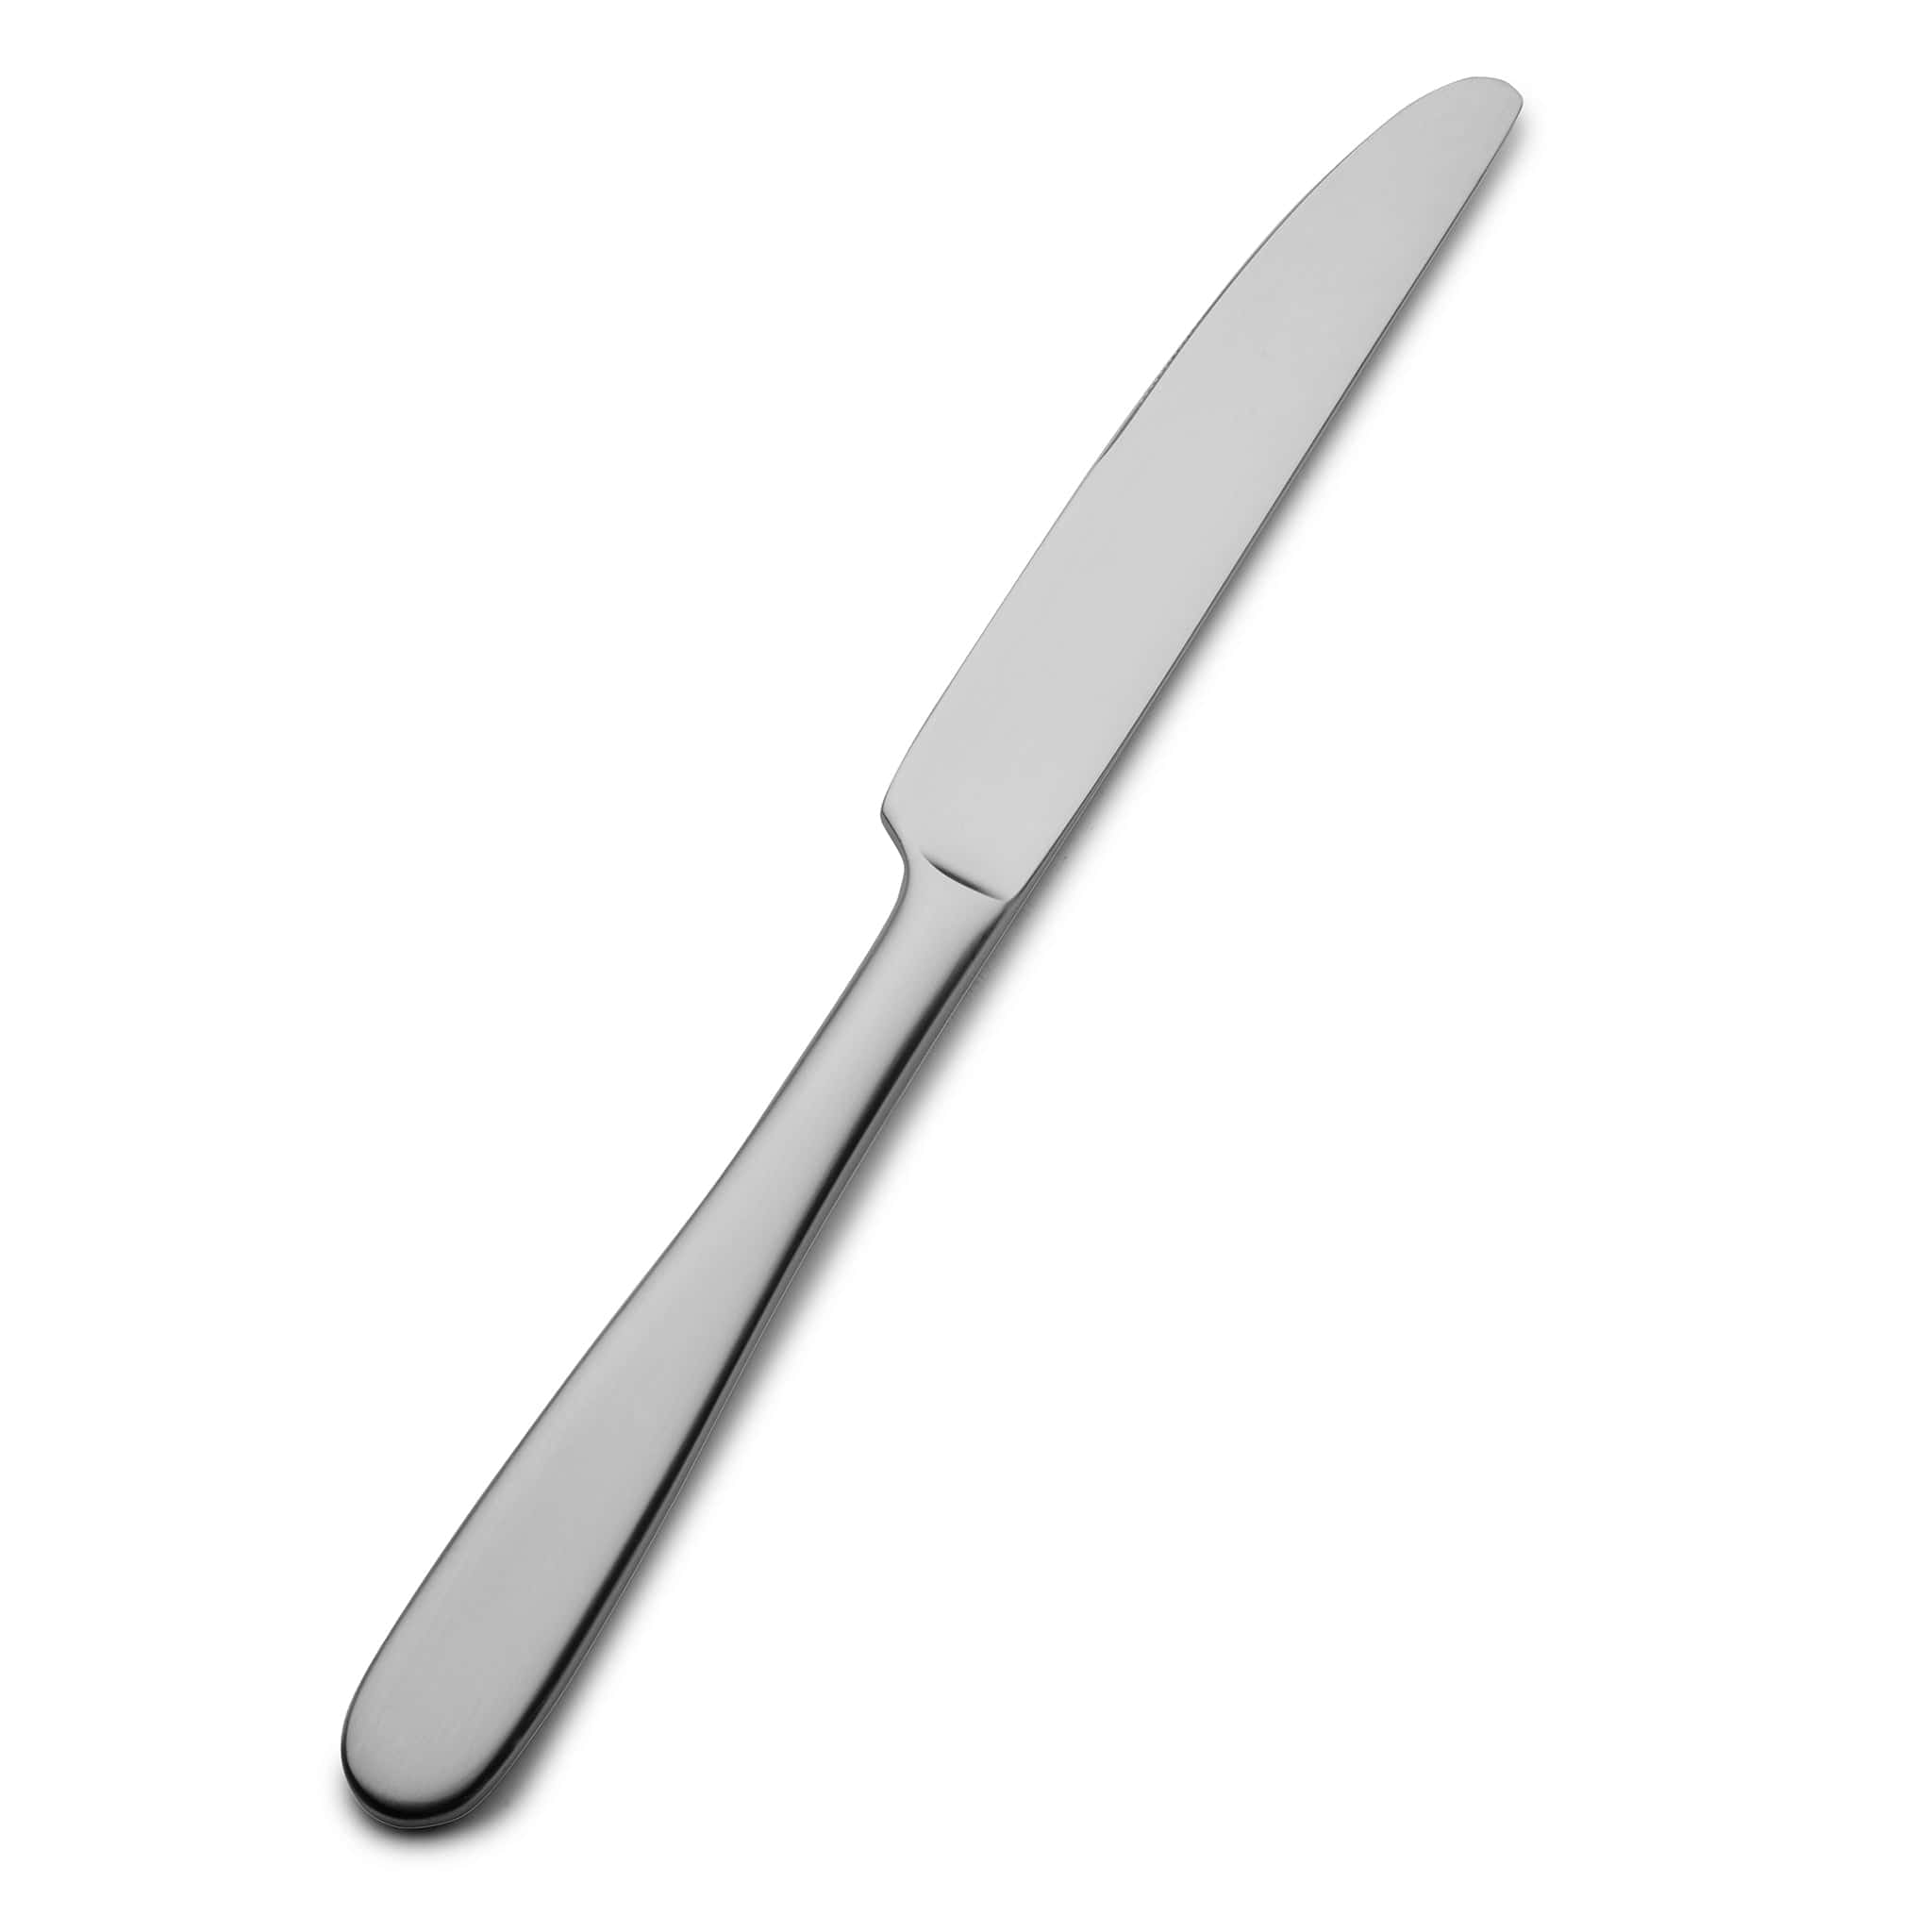 City Limit Satin 18/10 Table Knife 9.5" Stainless Steel